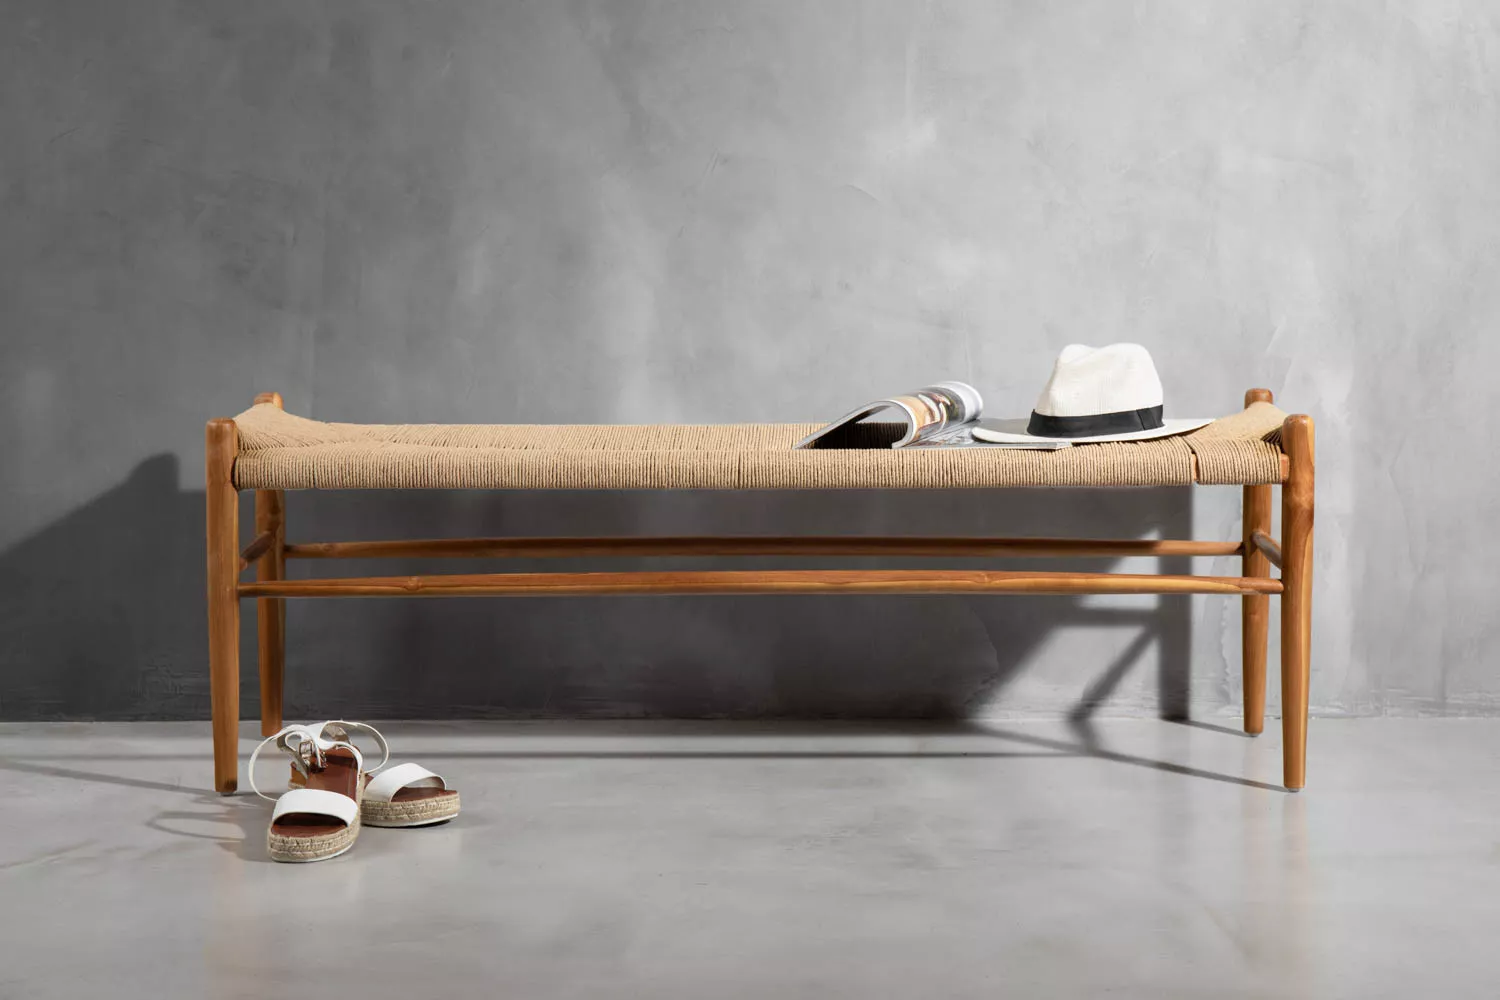 Embrace Balinese Elegance: The Timeless Allure of Bali Benches